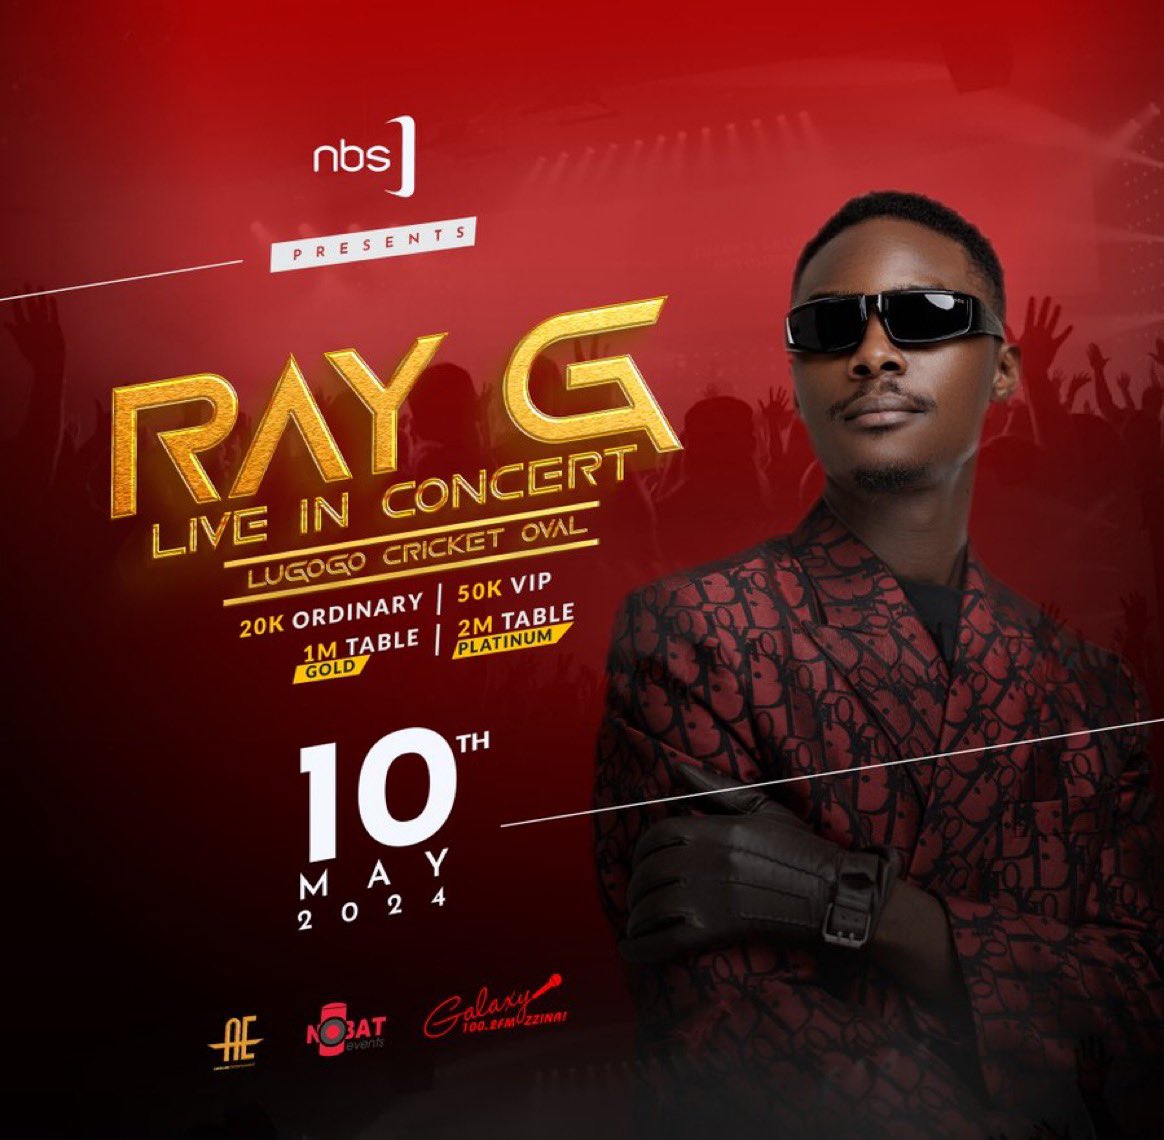 Tell a friend to tell a friend that on 10th May we’re showing up for this our person at Cricket Oval. Sikyo?? 💃🏻💃🏻 🔥🔥🔥🔥 #RayGLiveInConcert